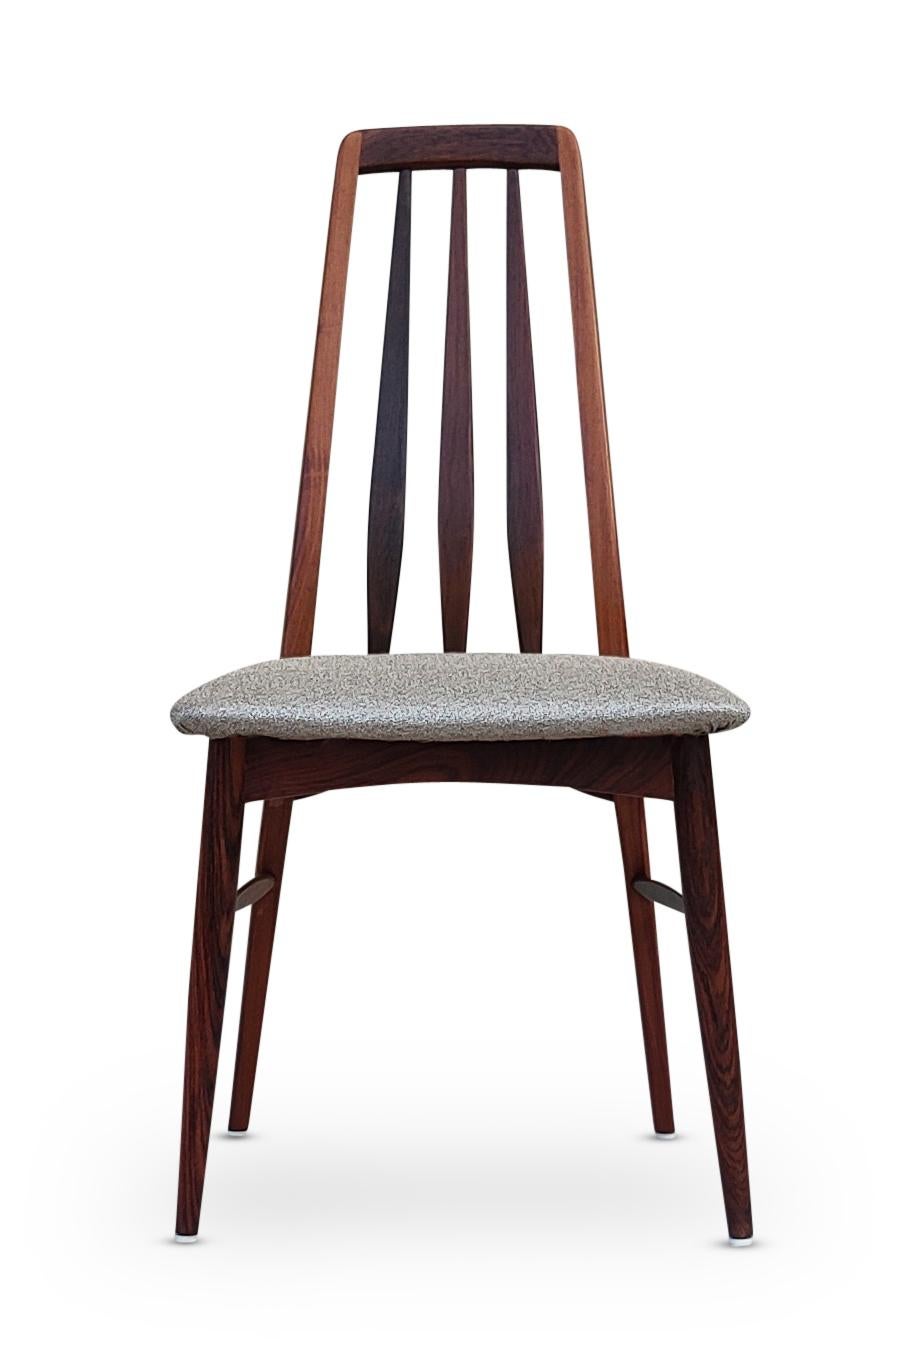 Mid-20th Century Niels Koefoed Eva Mid-Century Danish Rosewood Dining Chairs, Set of 6 For Sale